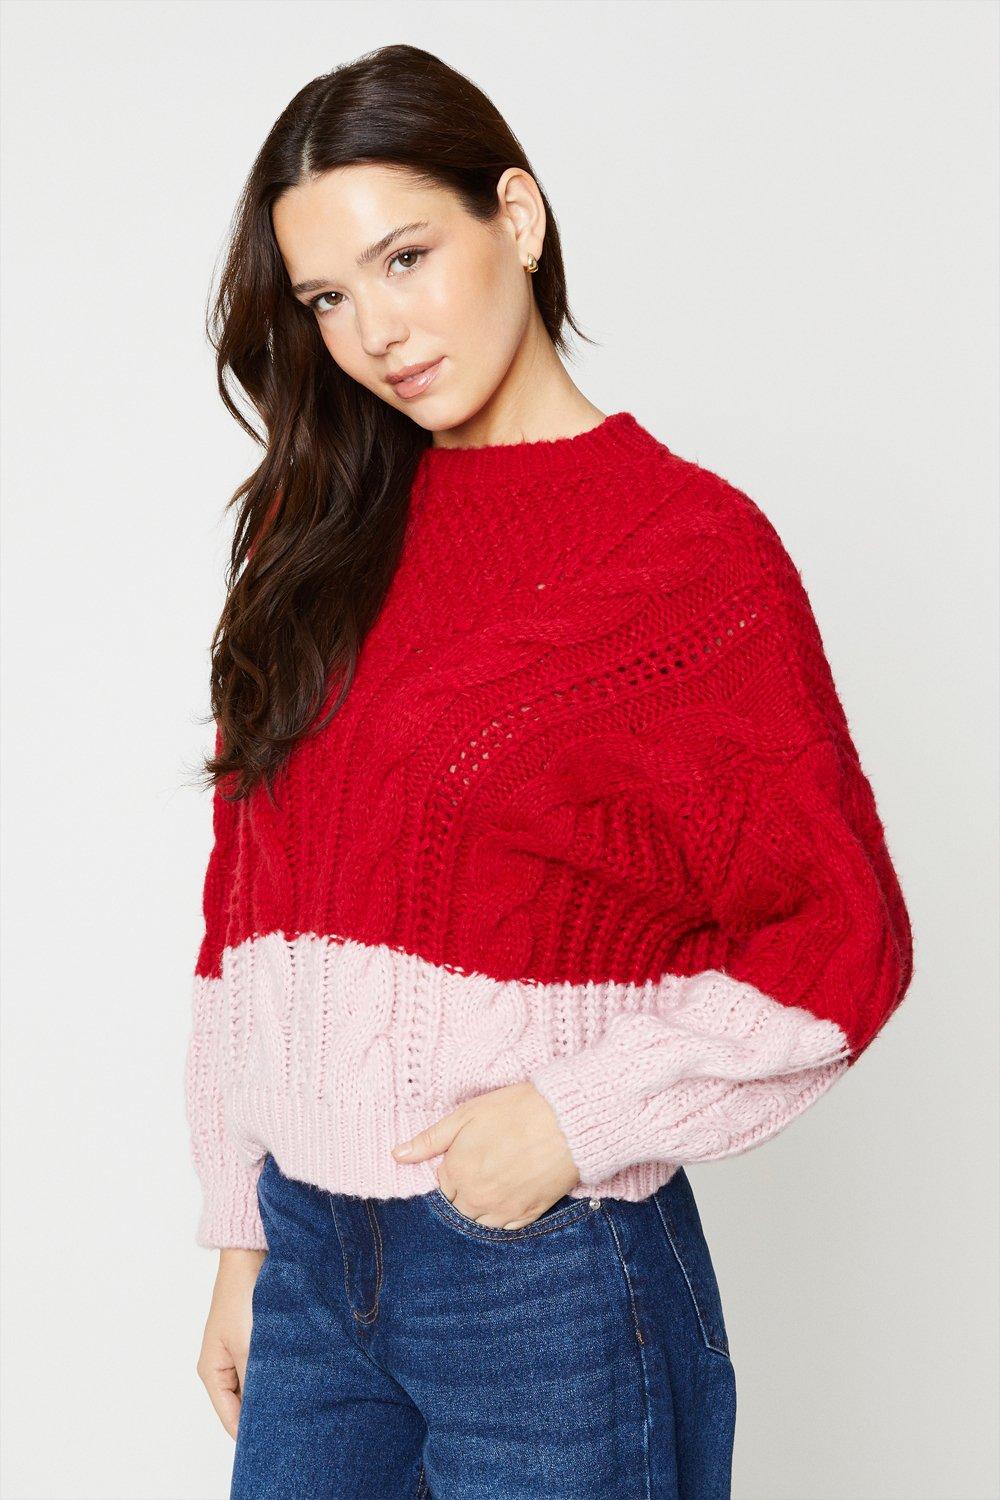 Women’s Long Sleeve Colour Block Cable Knitted Jumper - red - M